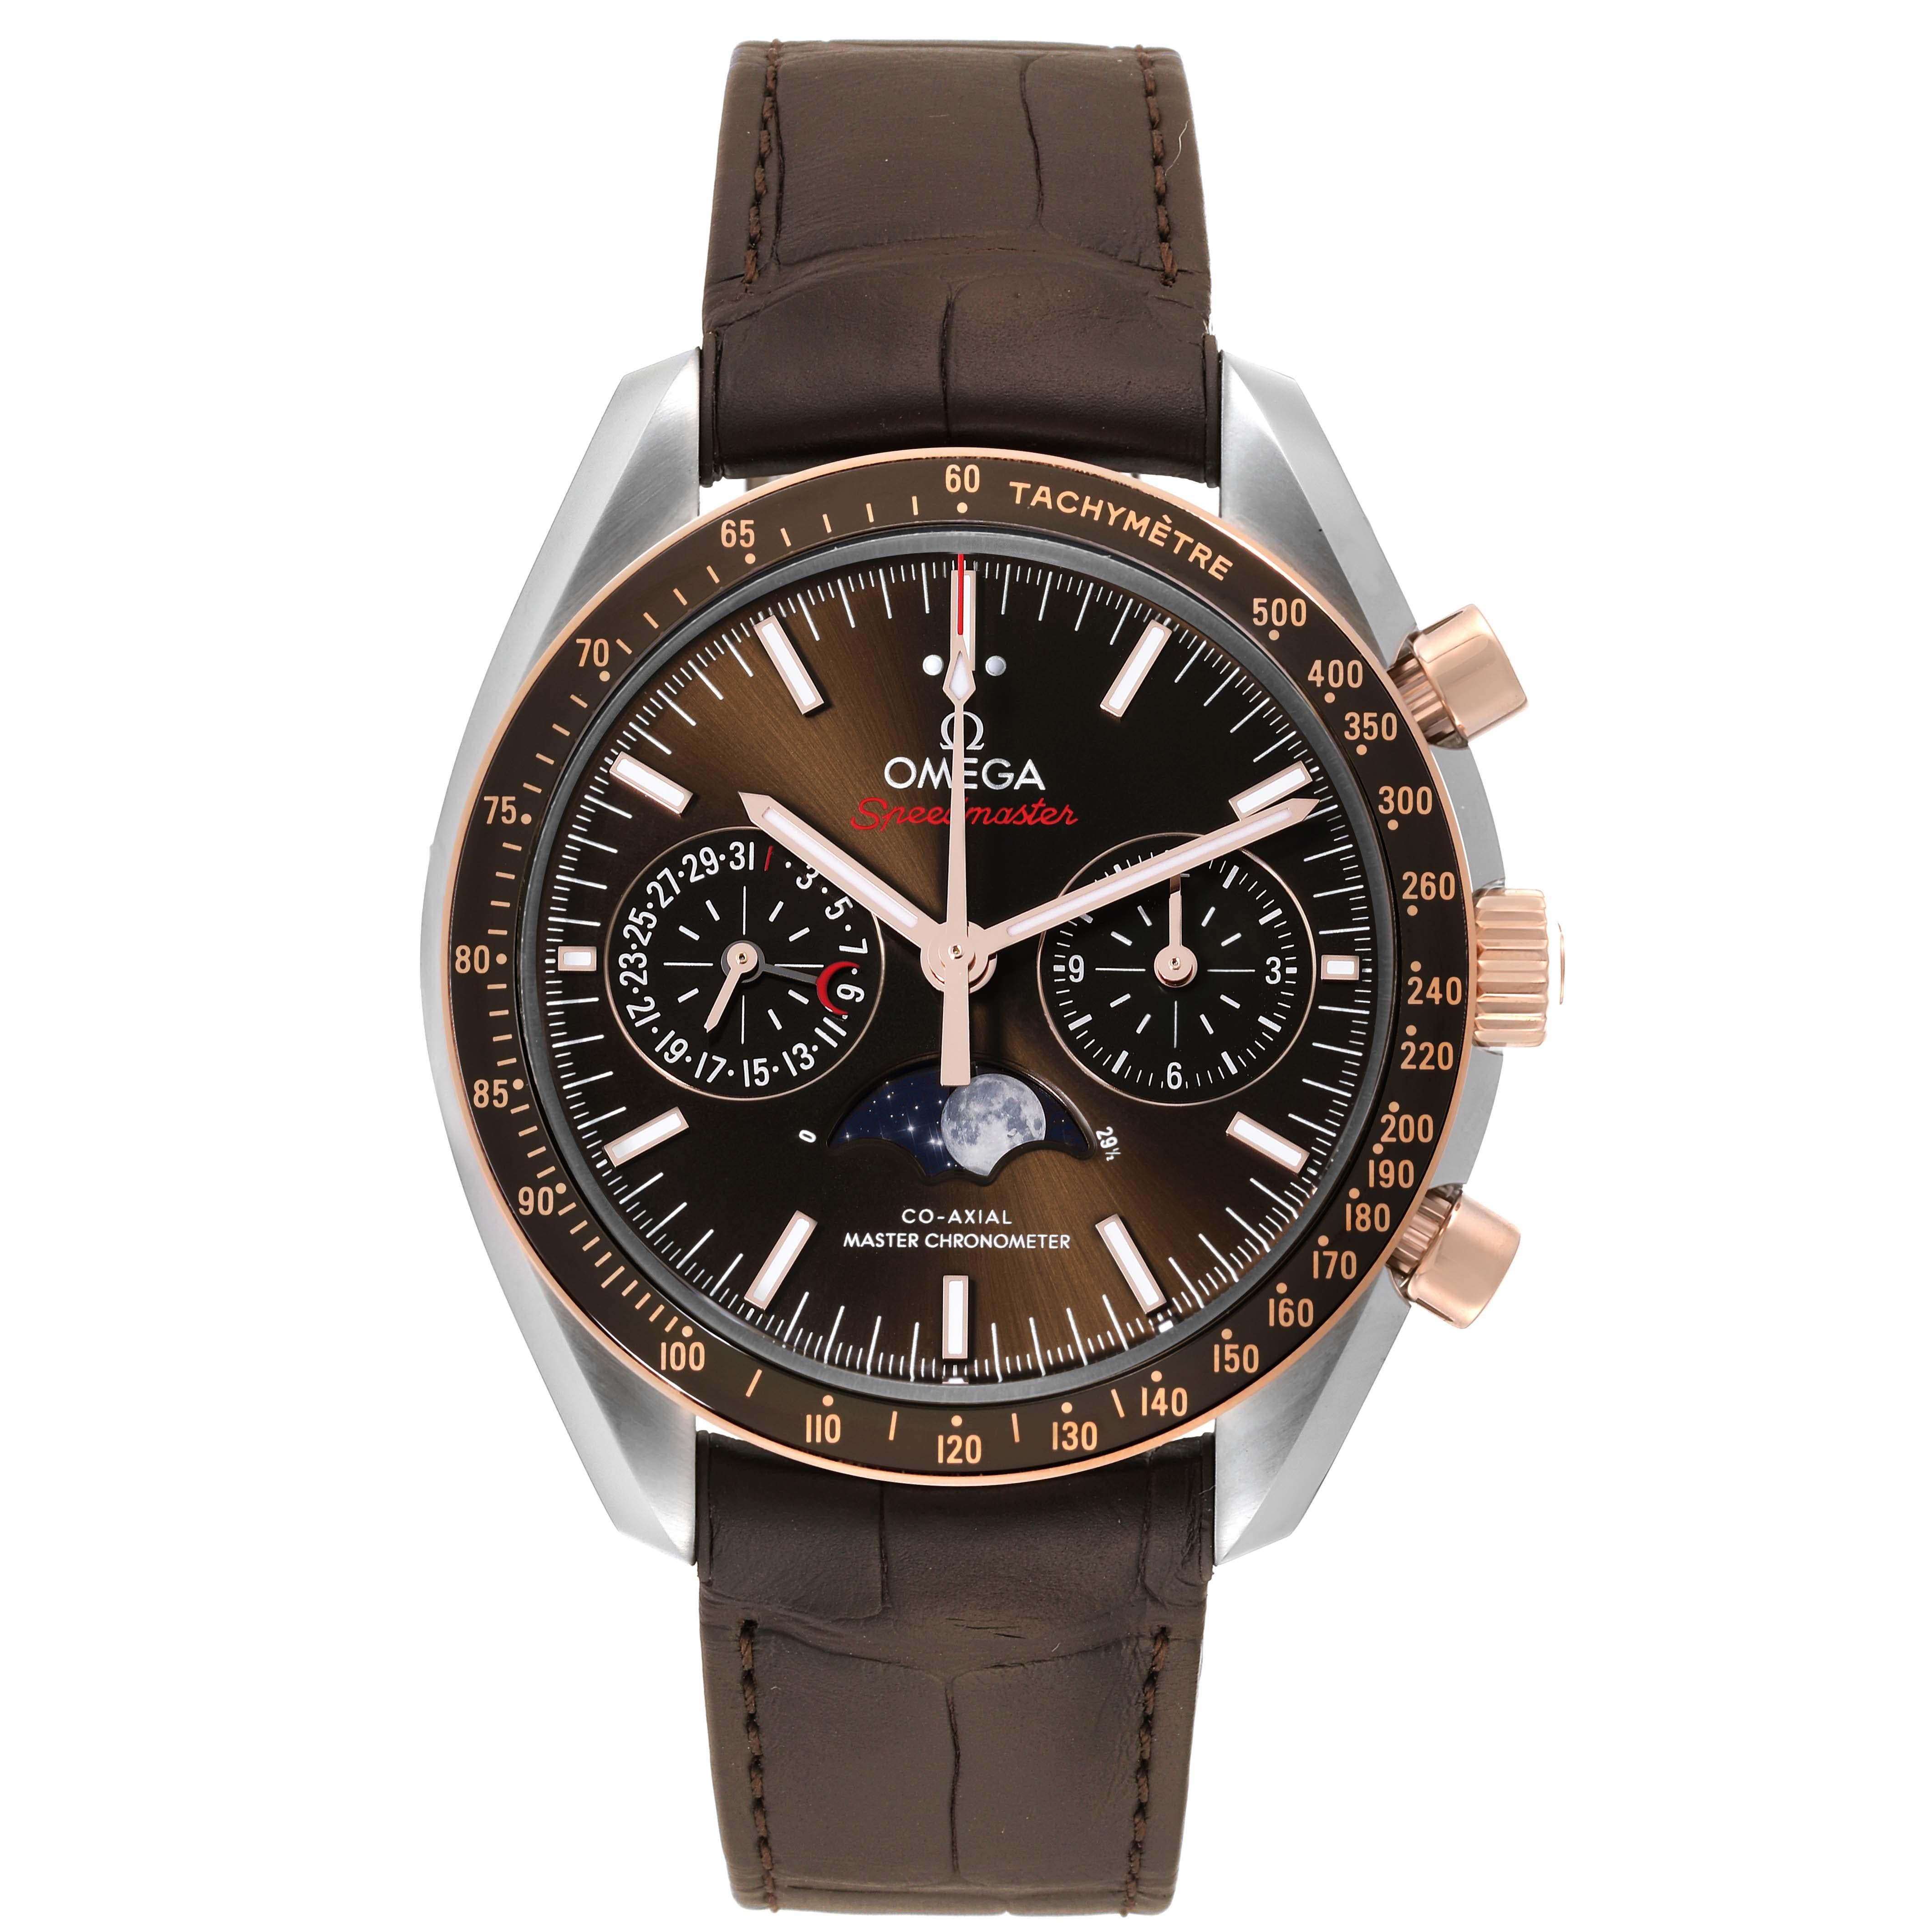 Omega Speedmaster Moonphase Chronograph Mens Watch 304.23.44.52.13.001 Box Card. Automatic self-winding chronograph movement with column wheel mechanism and Co-Axial Escapement. Silicon balance-spring on free sprung-balance, 2 barrels mounted in